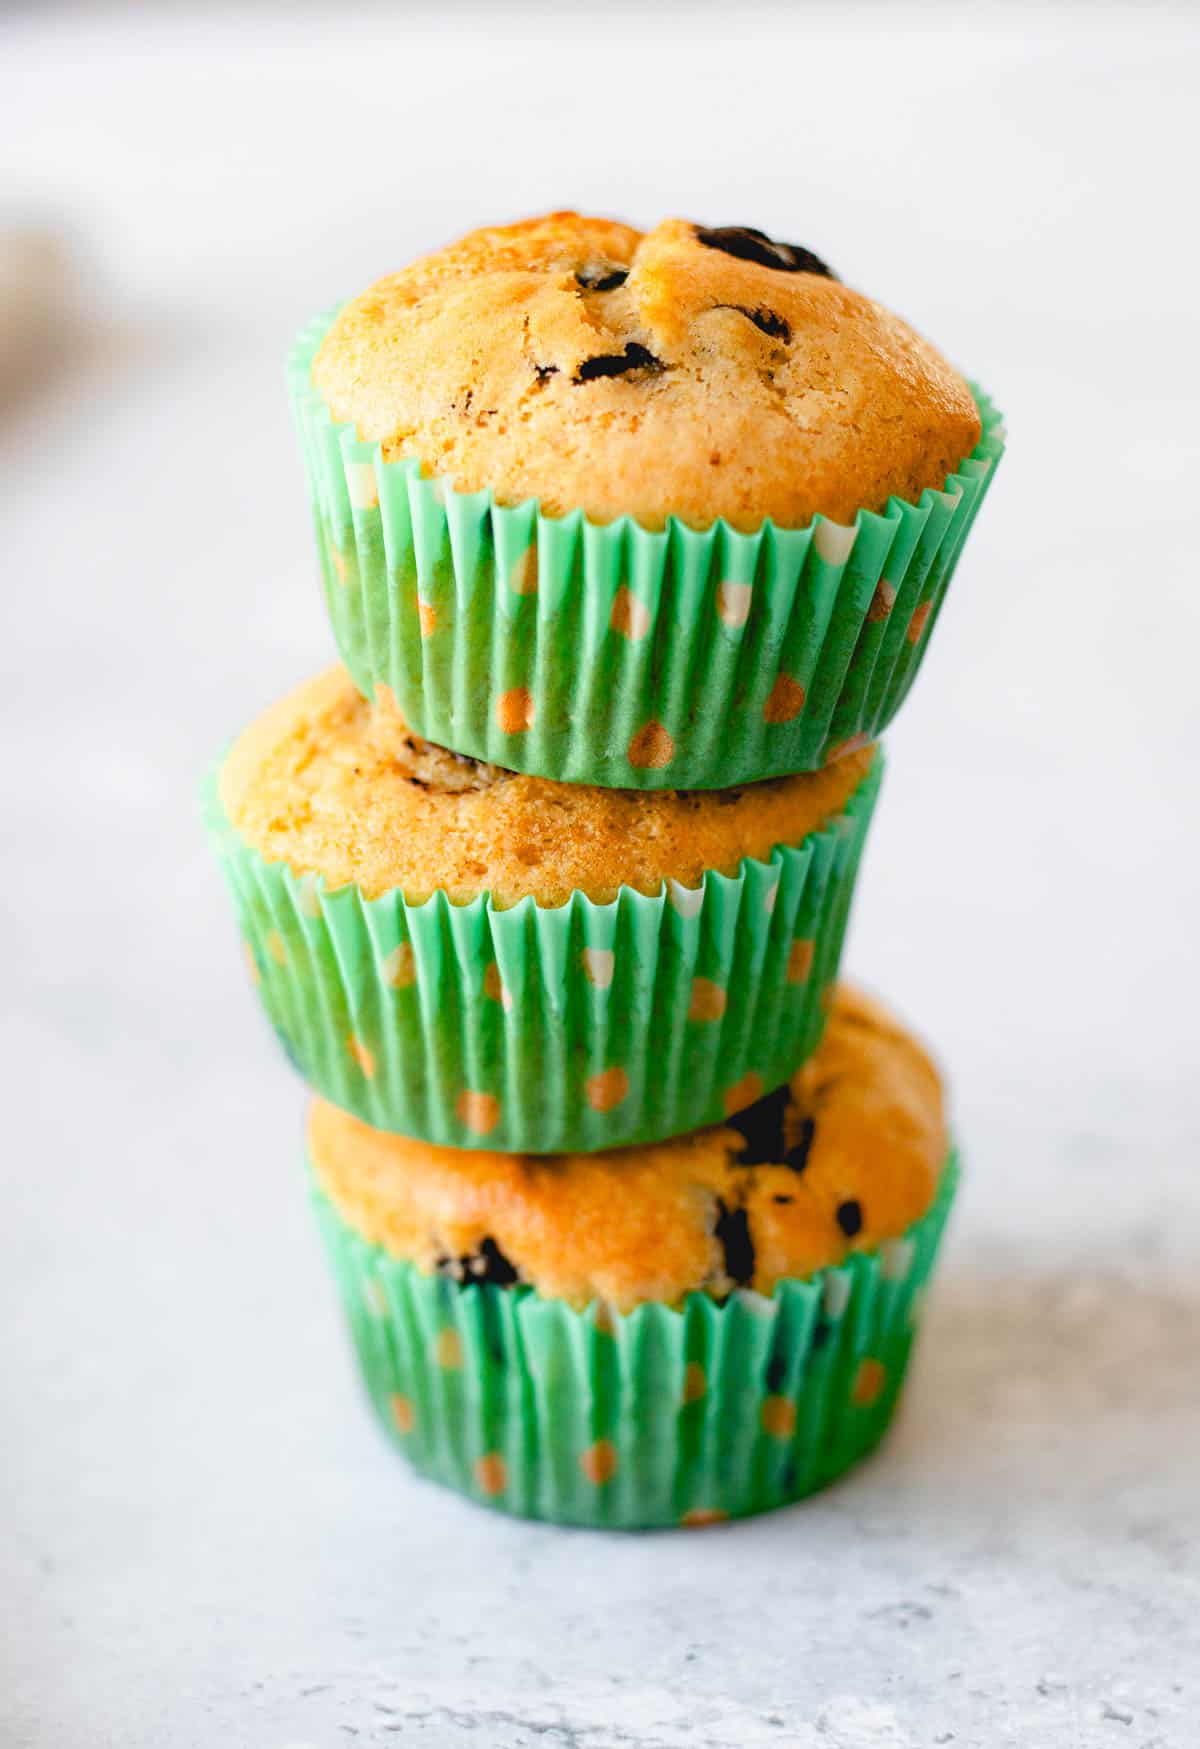 3 chocolate chip muffins stacked on top of each other.